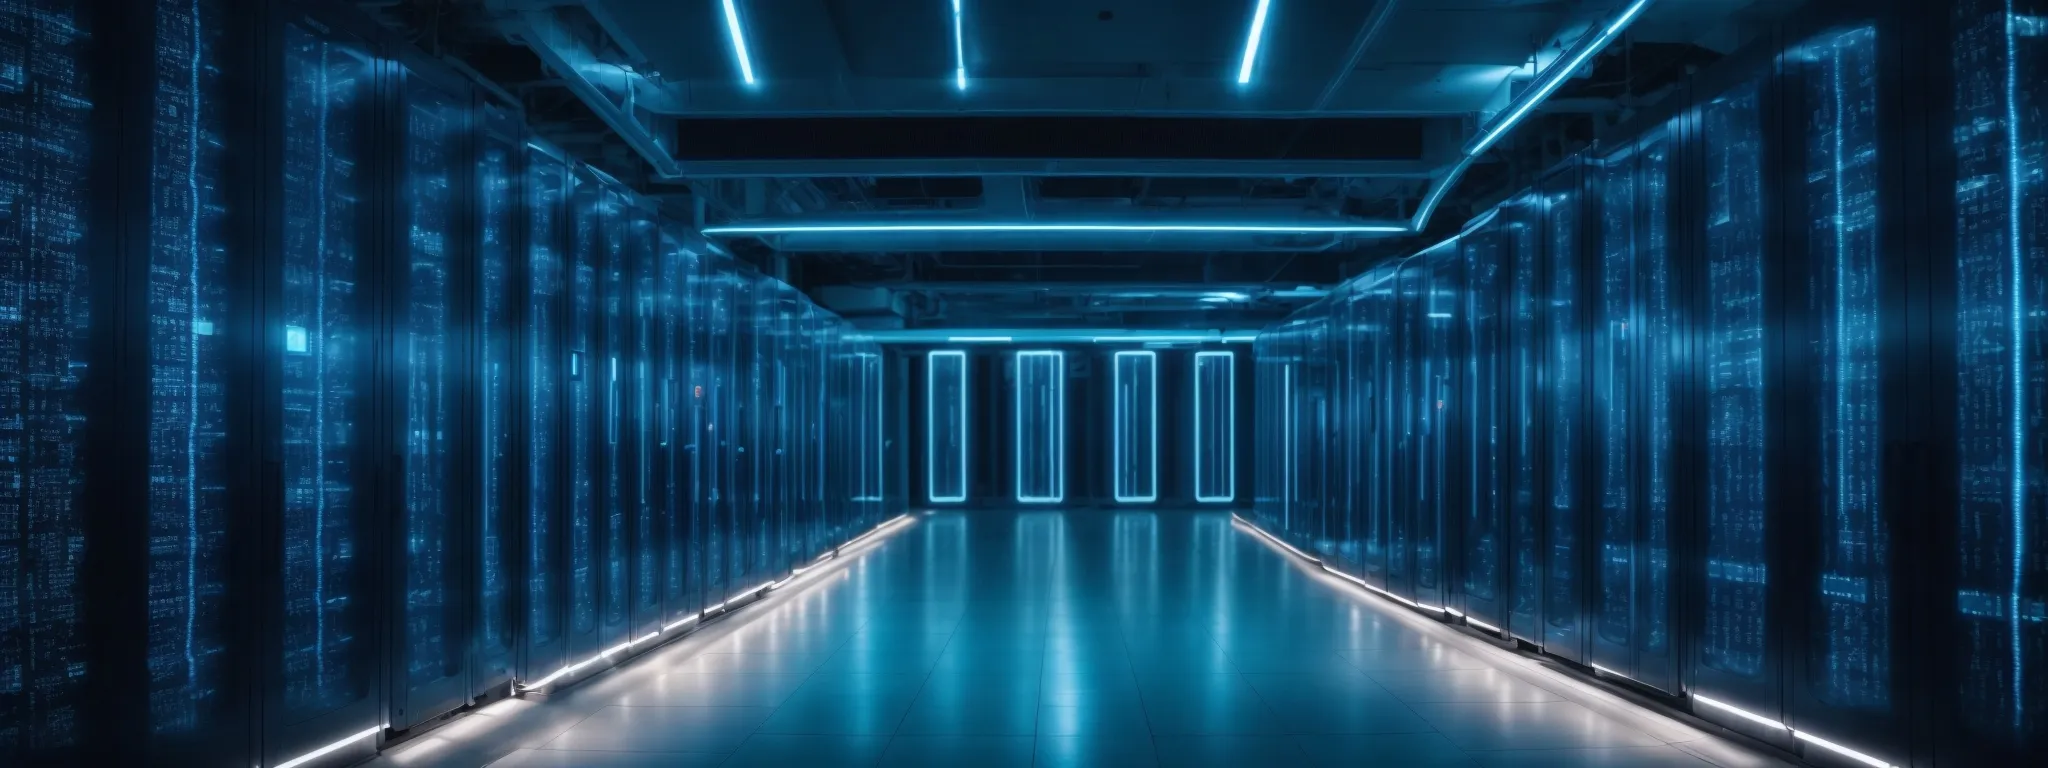 a futuristic data center with rows of high-speed servers emitting a cool blue glow.